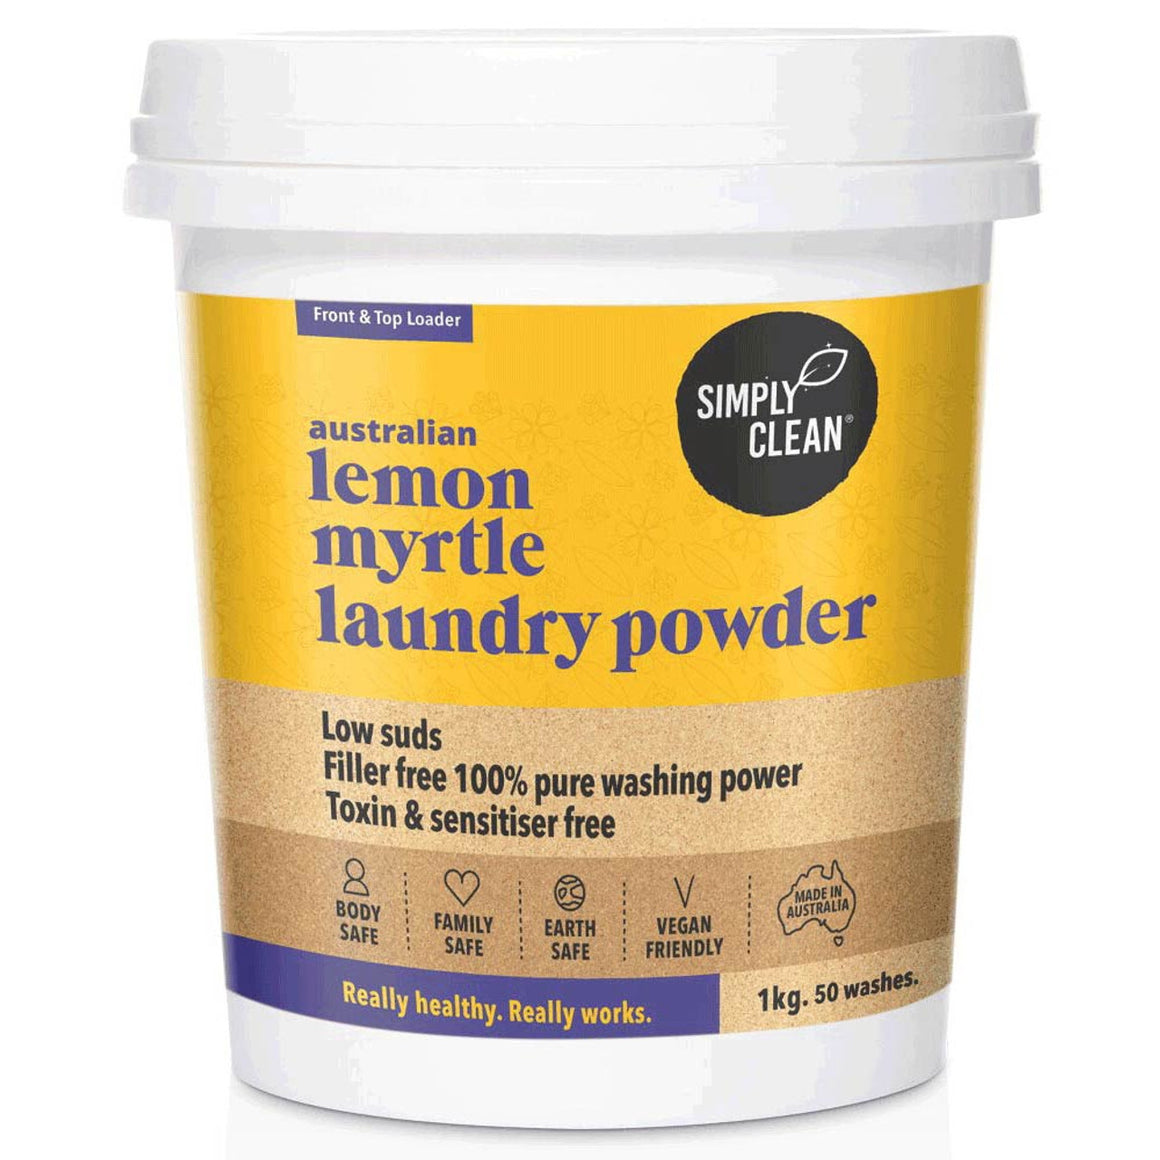 Simply Clean Laundry Powder